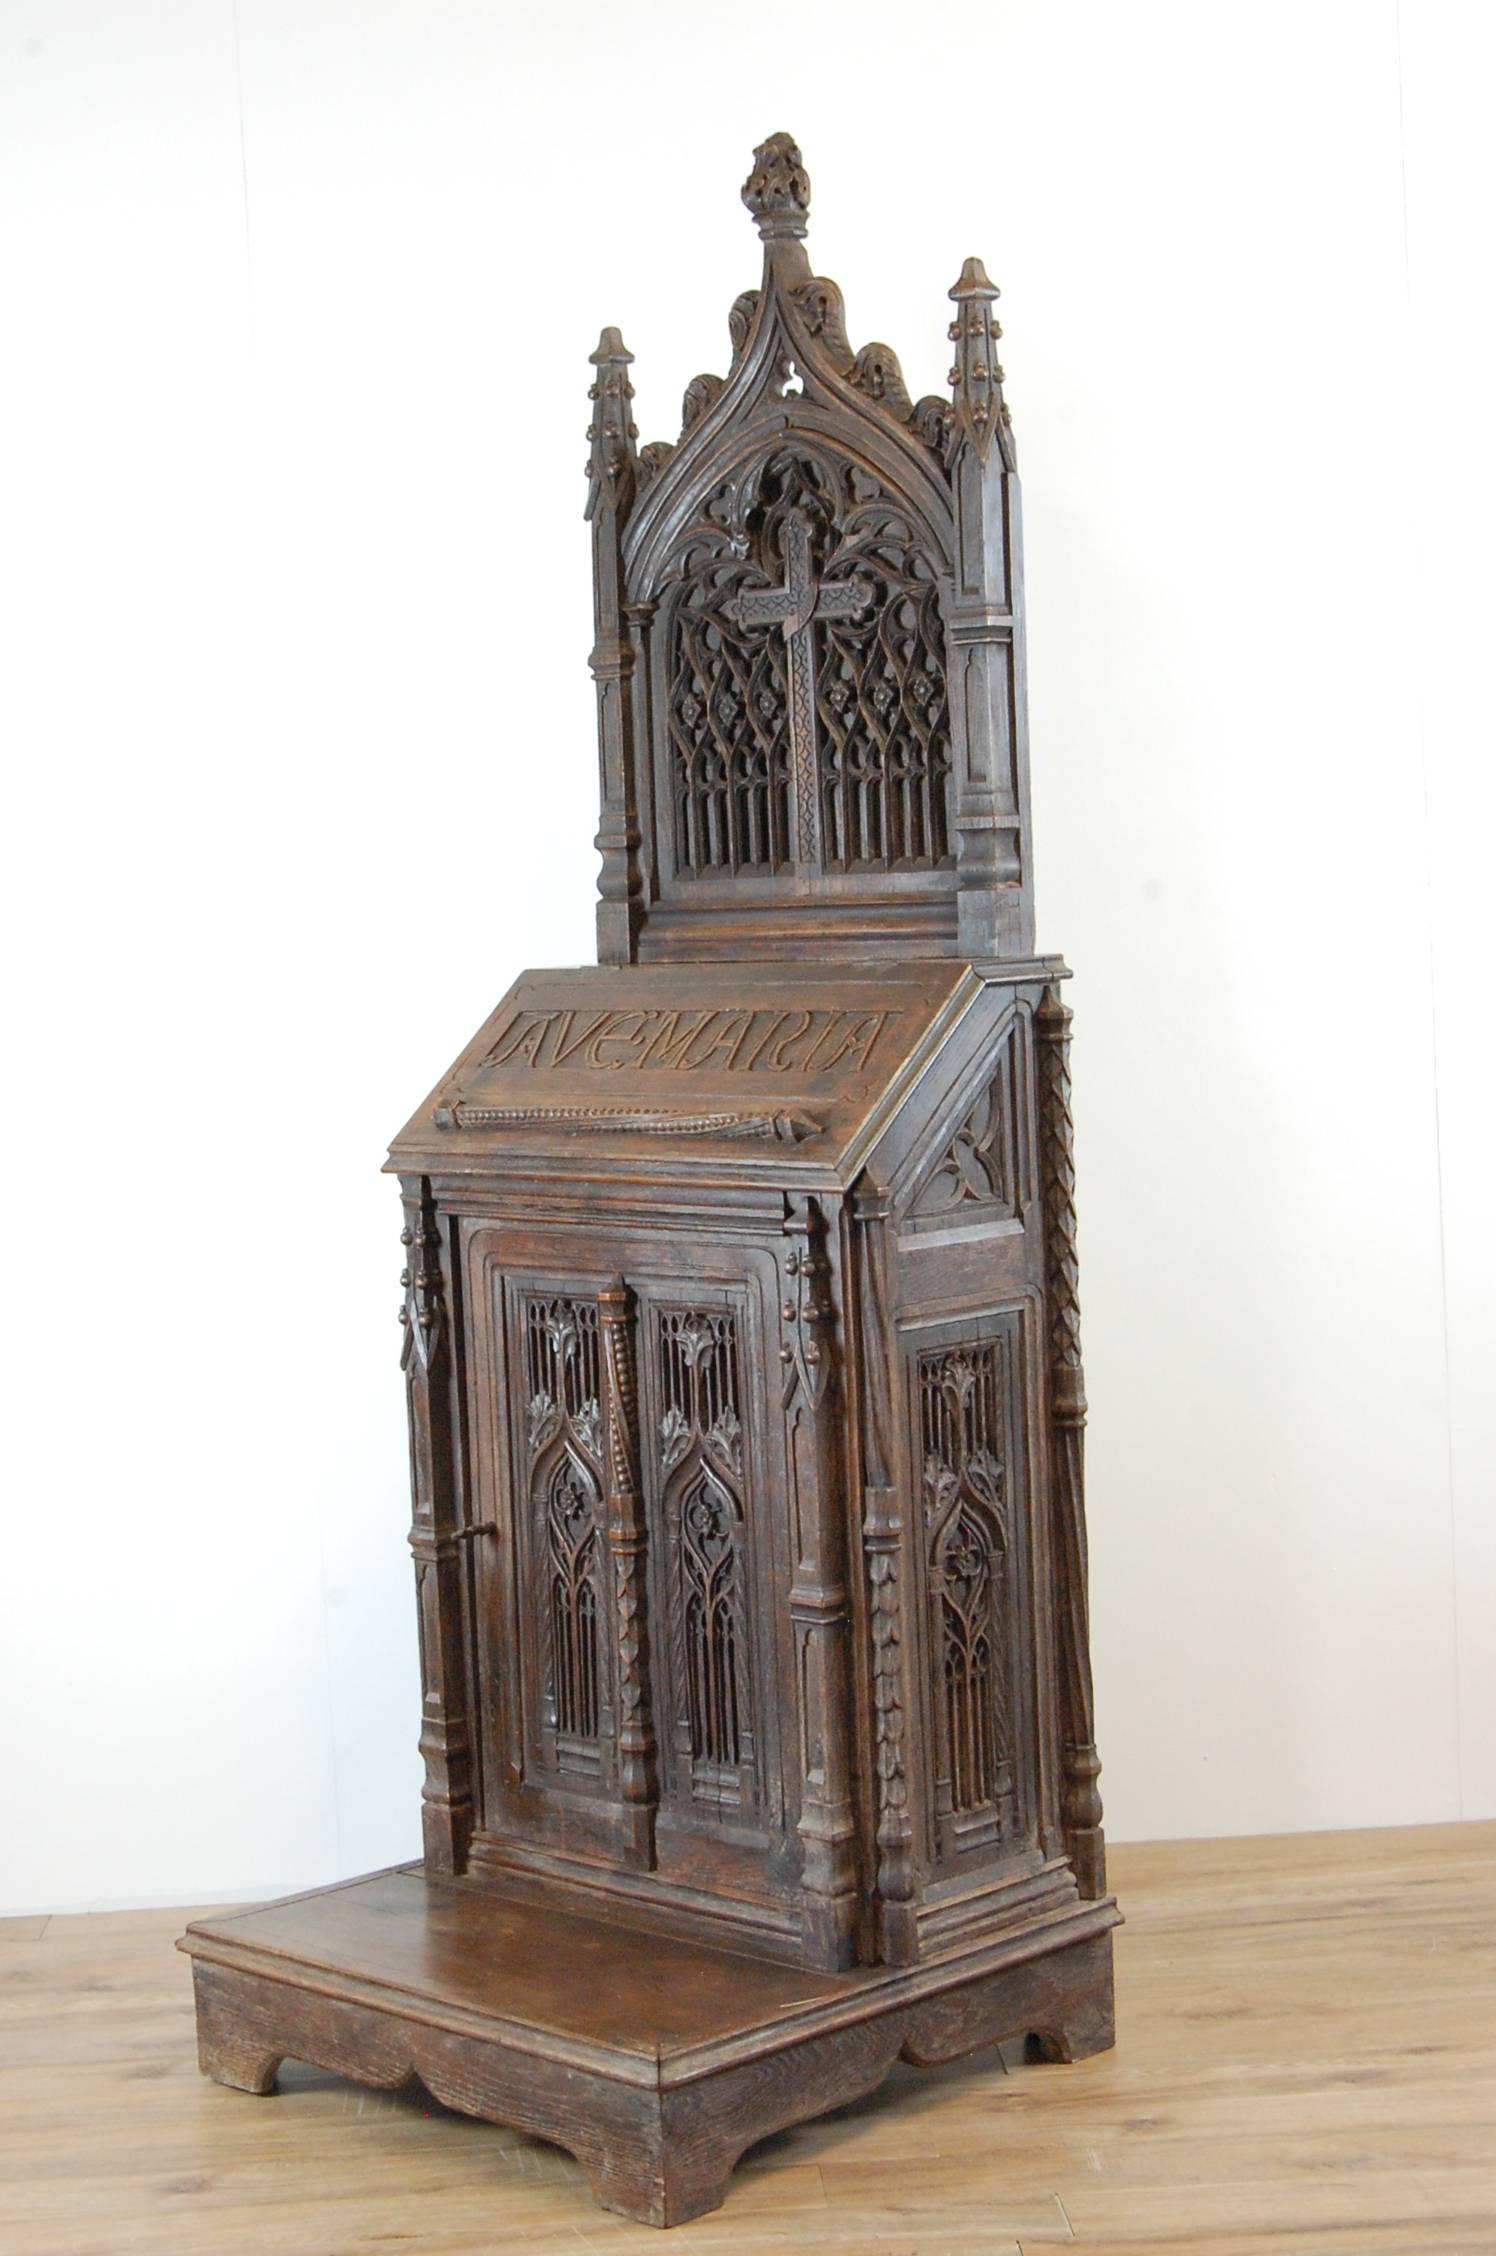 Mid-19th century heavily carved oak Prie - Dieu, highly ornate carving, designed for private devotional use. This is a fine example, with original key for lower cupboard, the top section does remove, there are one or two minor losses on the carving,